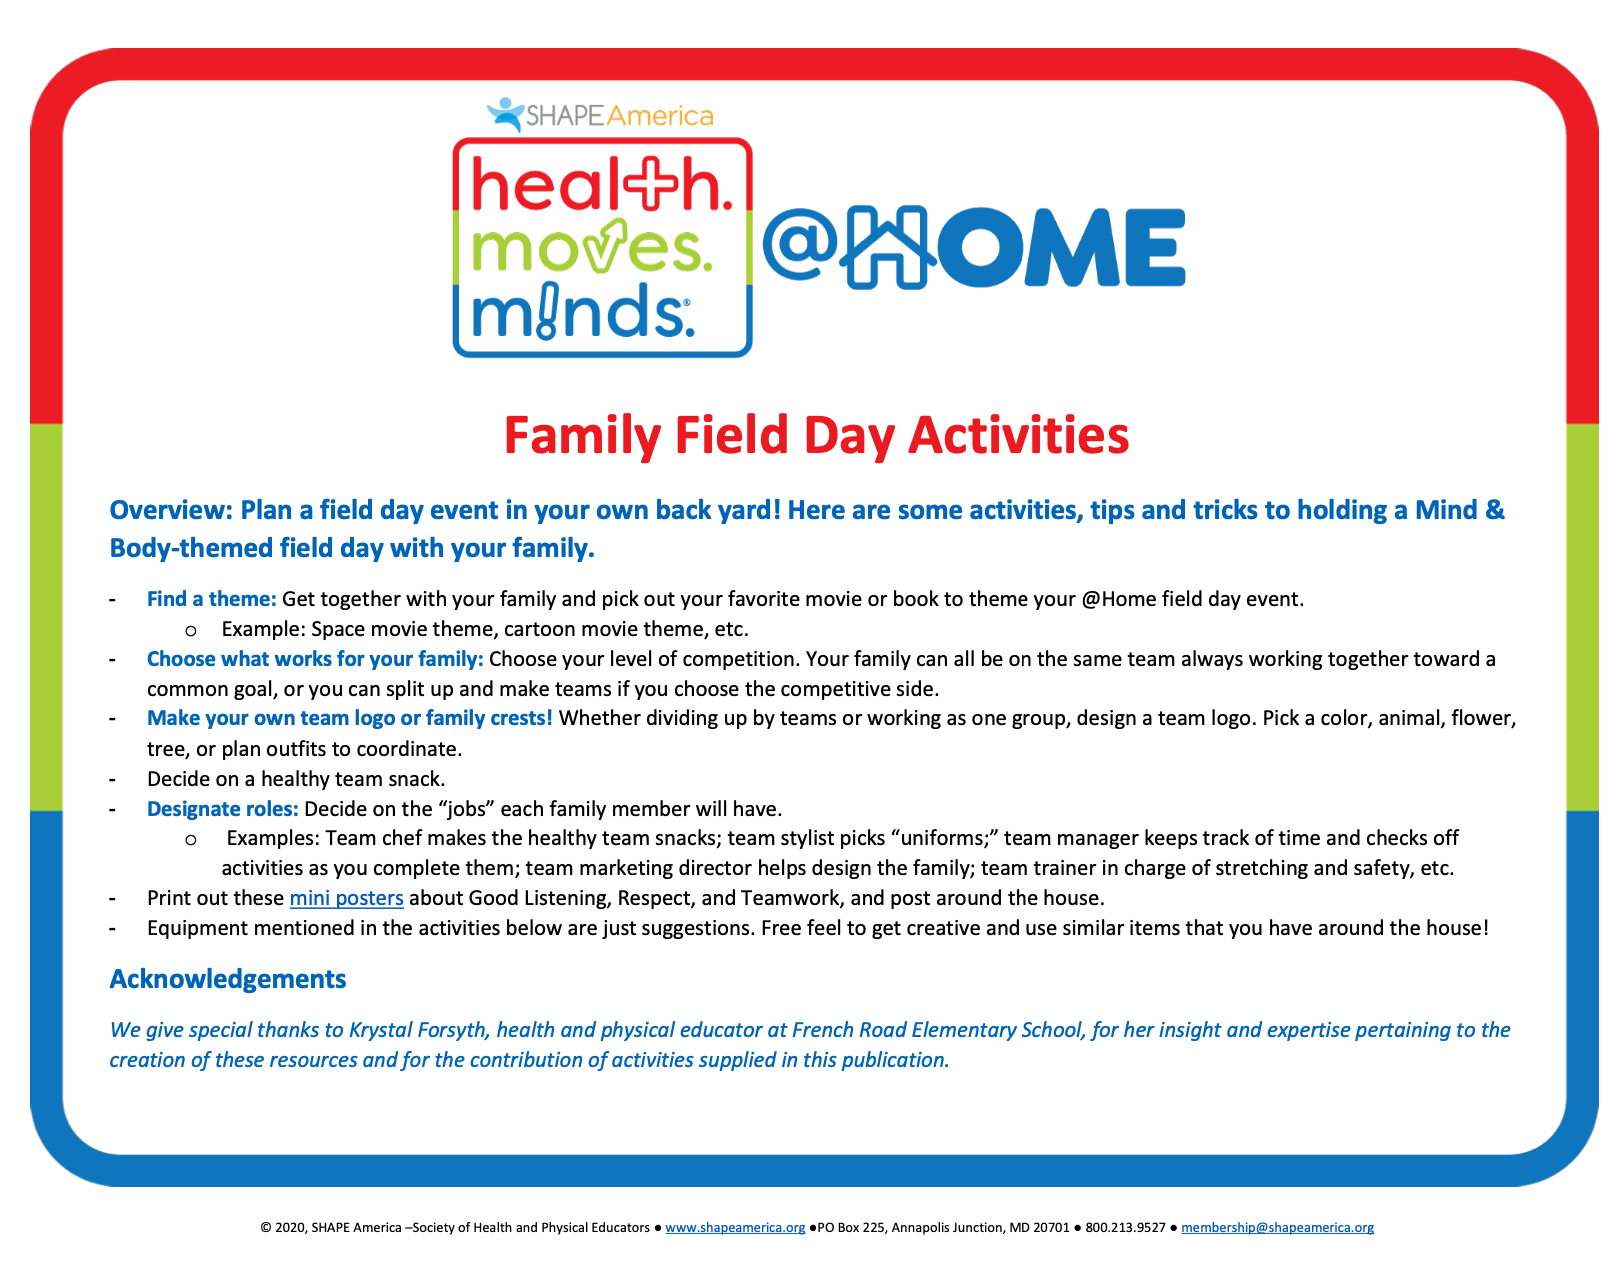 Family Field Day Activities